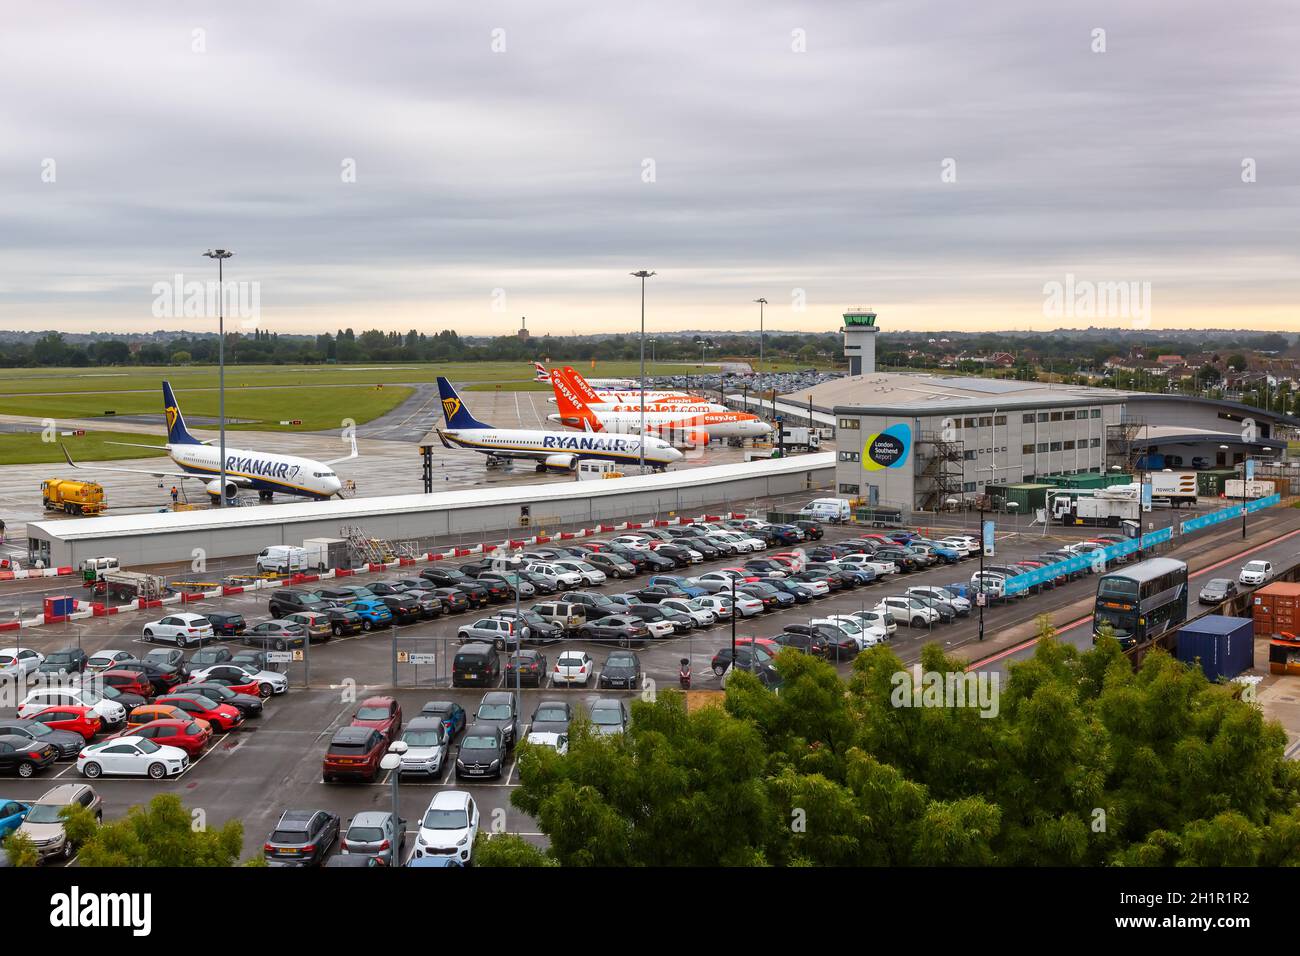 Southend, United Kingdom - July 7, 2019: Ryanair and EasyJet airplanes at London Southend airport (SEN) in the United Kingdom. Stock Photo